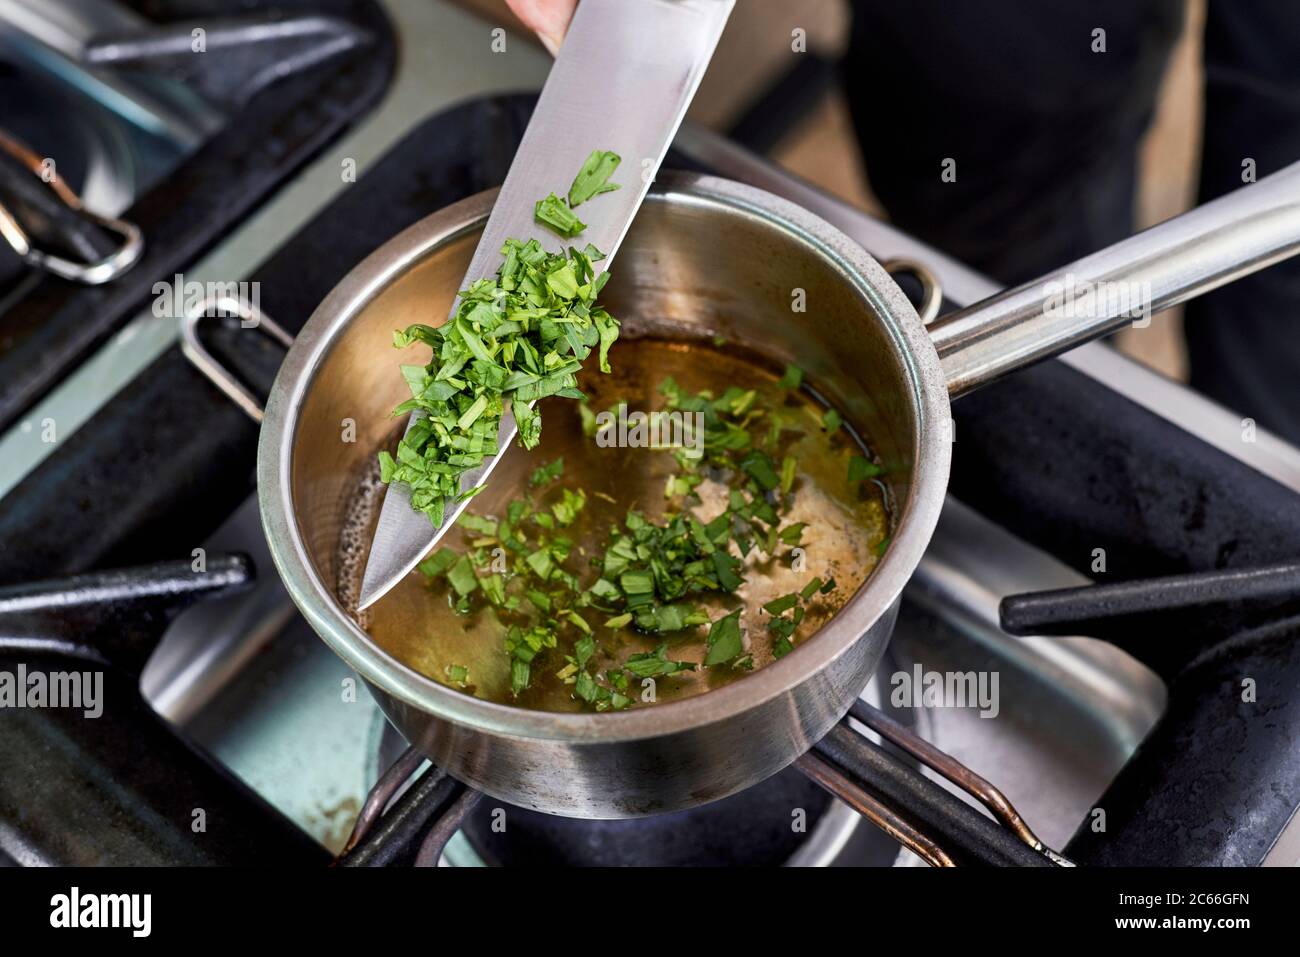 Preparation of Béarnaise Sauce step by step, finely chopped tarragon being added Stock Photo